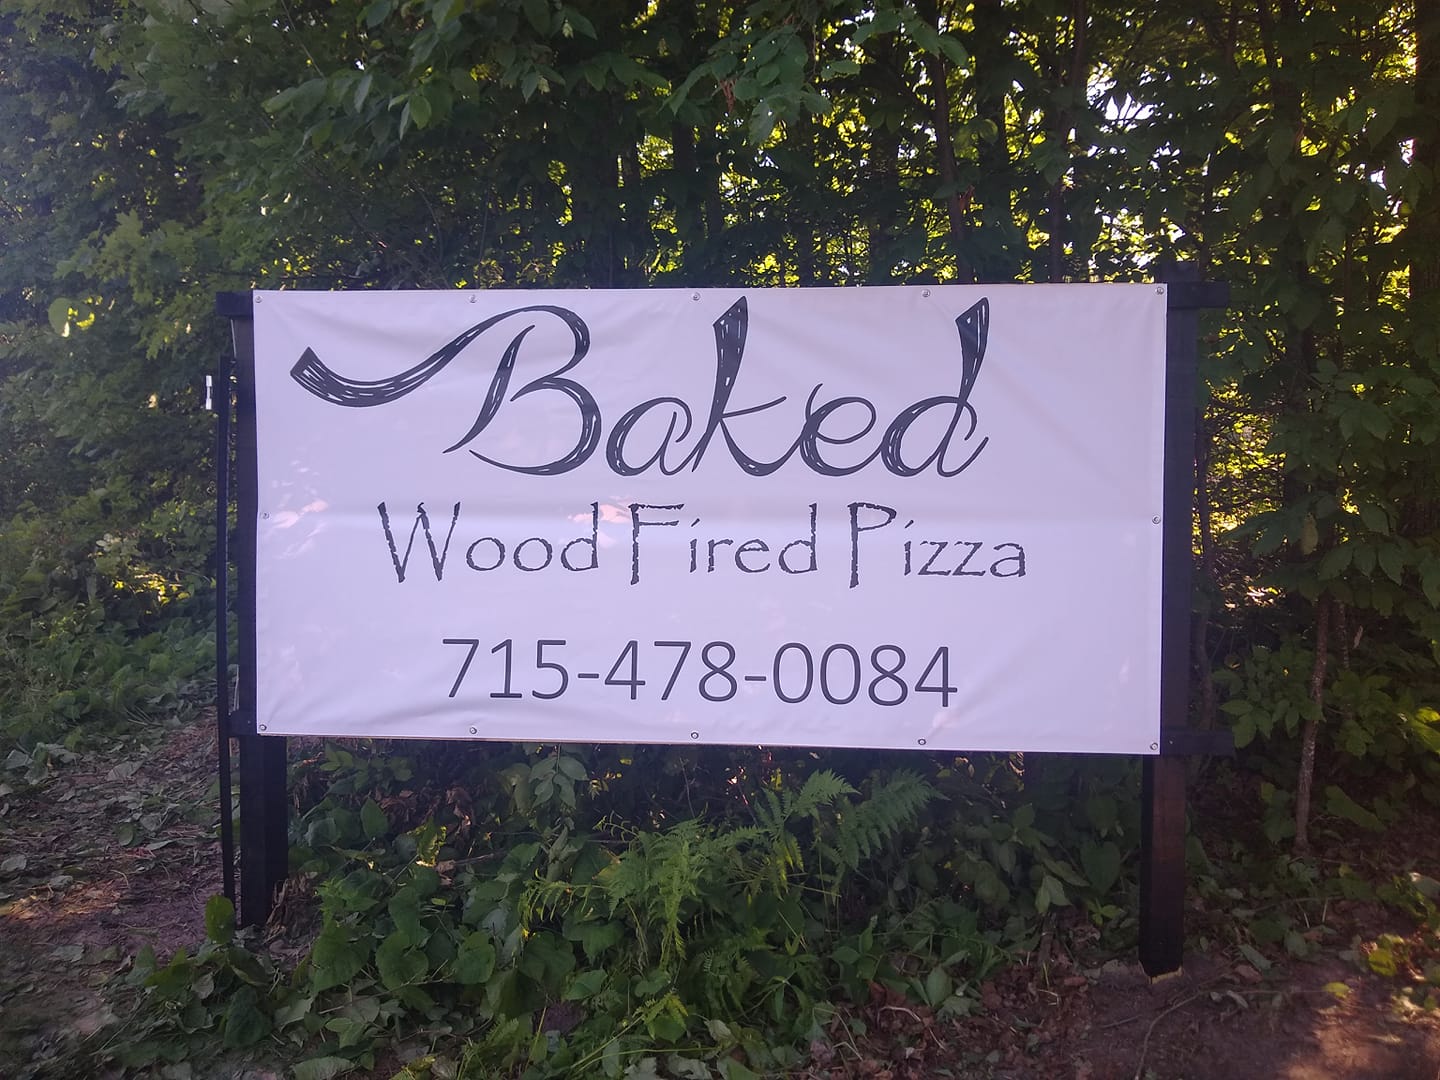 Baked pizza and pasta Crandon, WI 54520